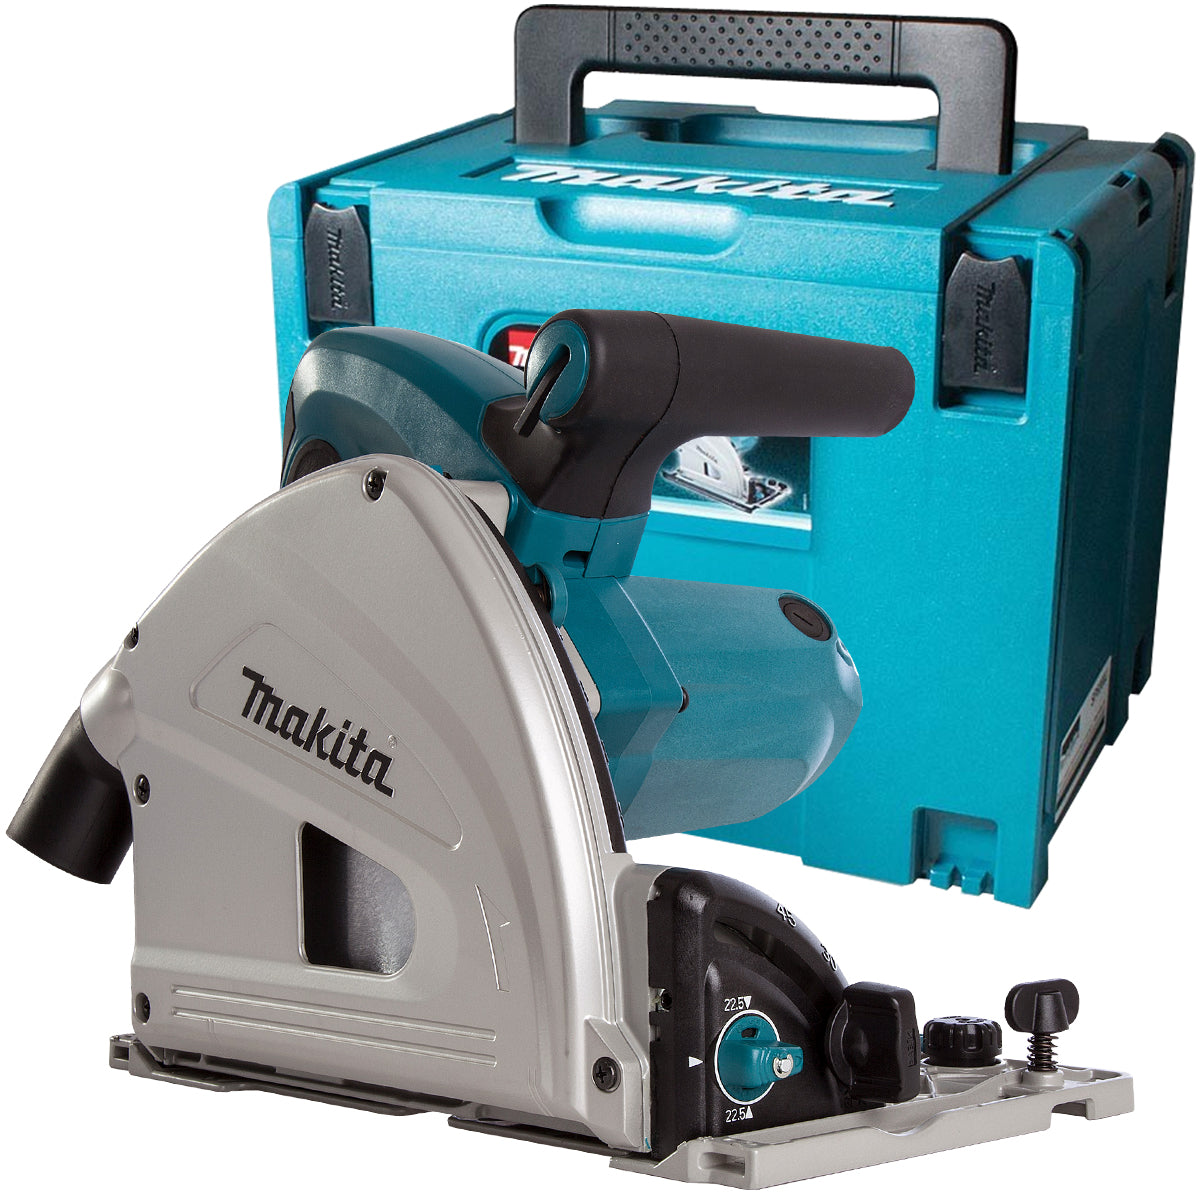 Makita SP6000J1/1 165mm Plunge Saw 110V with 2 x 1.5m Guide Rail in Bag + Connector & Case